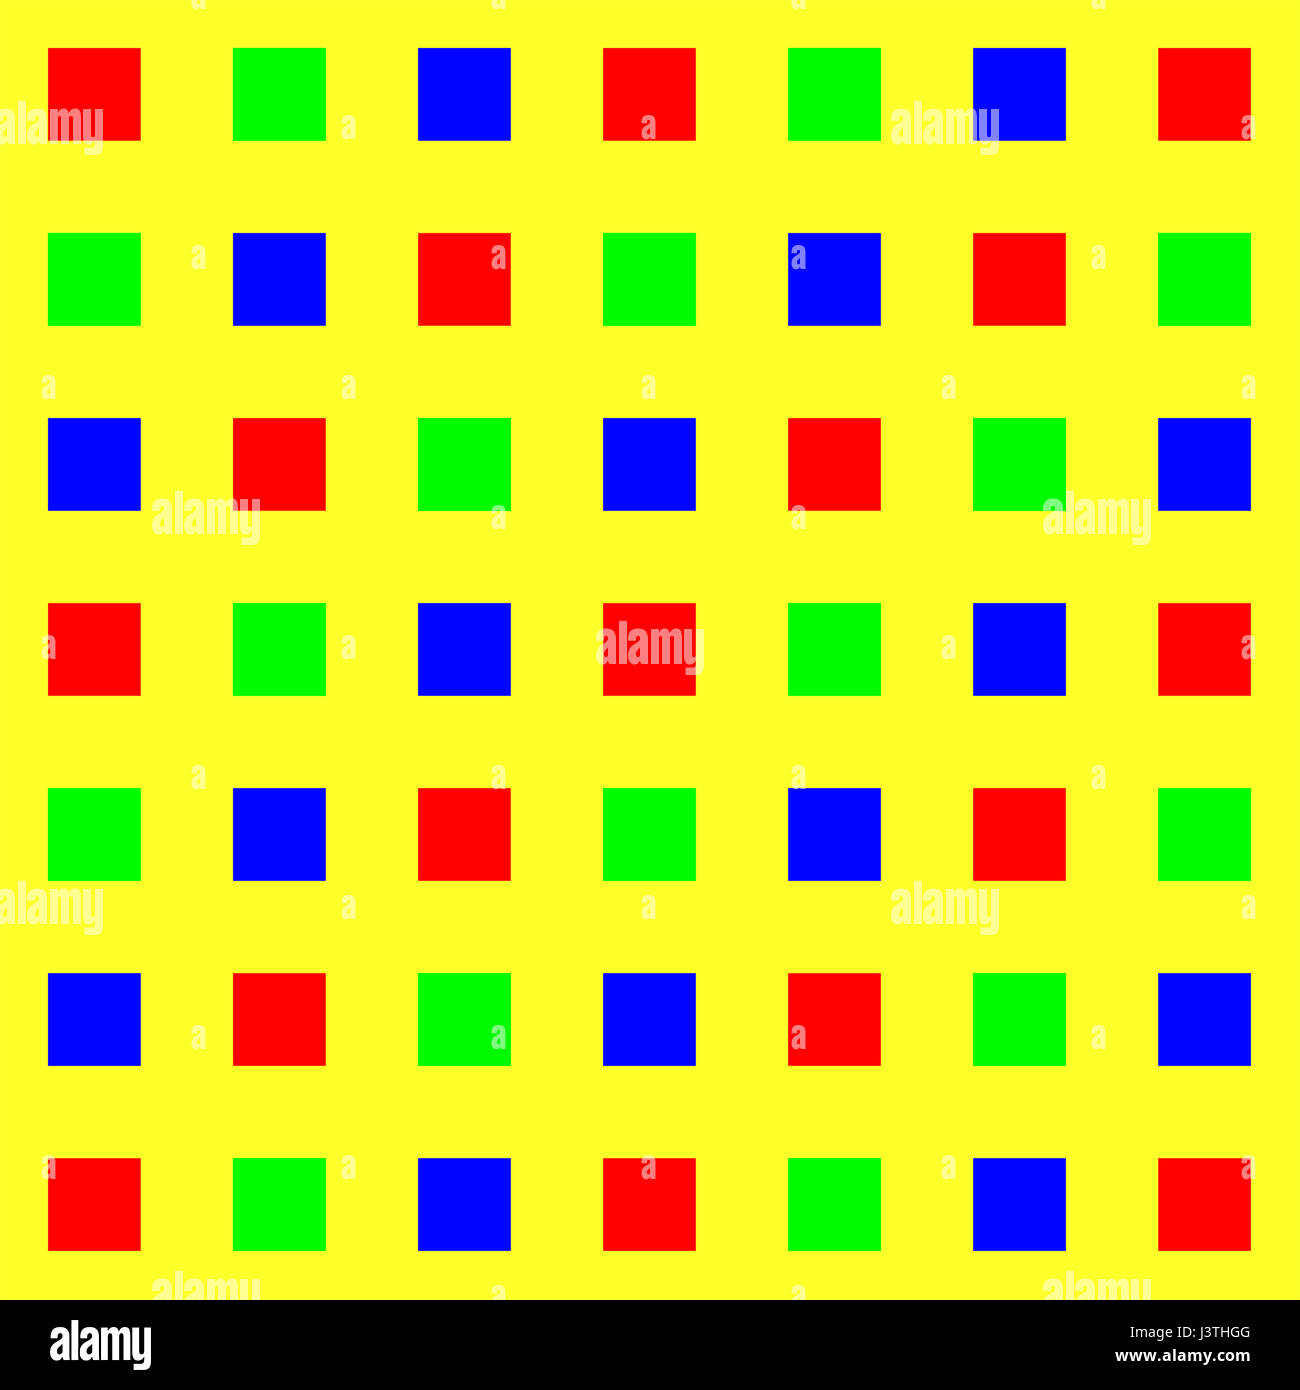 Red Green Blue Squares on Yellow Background. Stock Photo